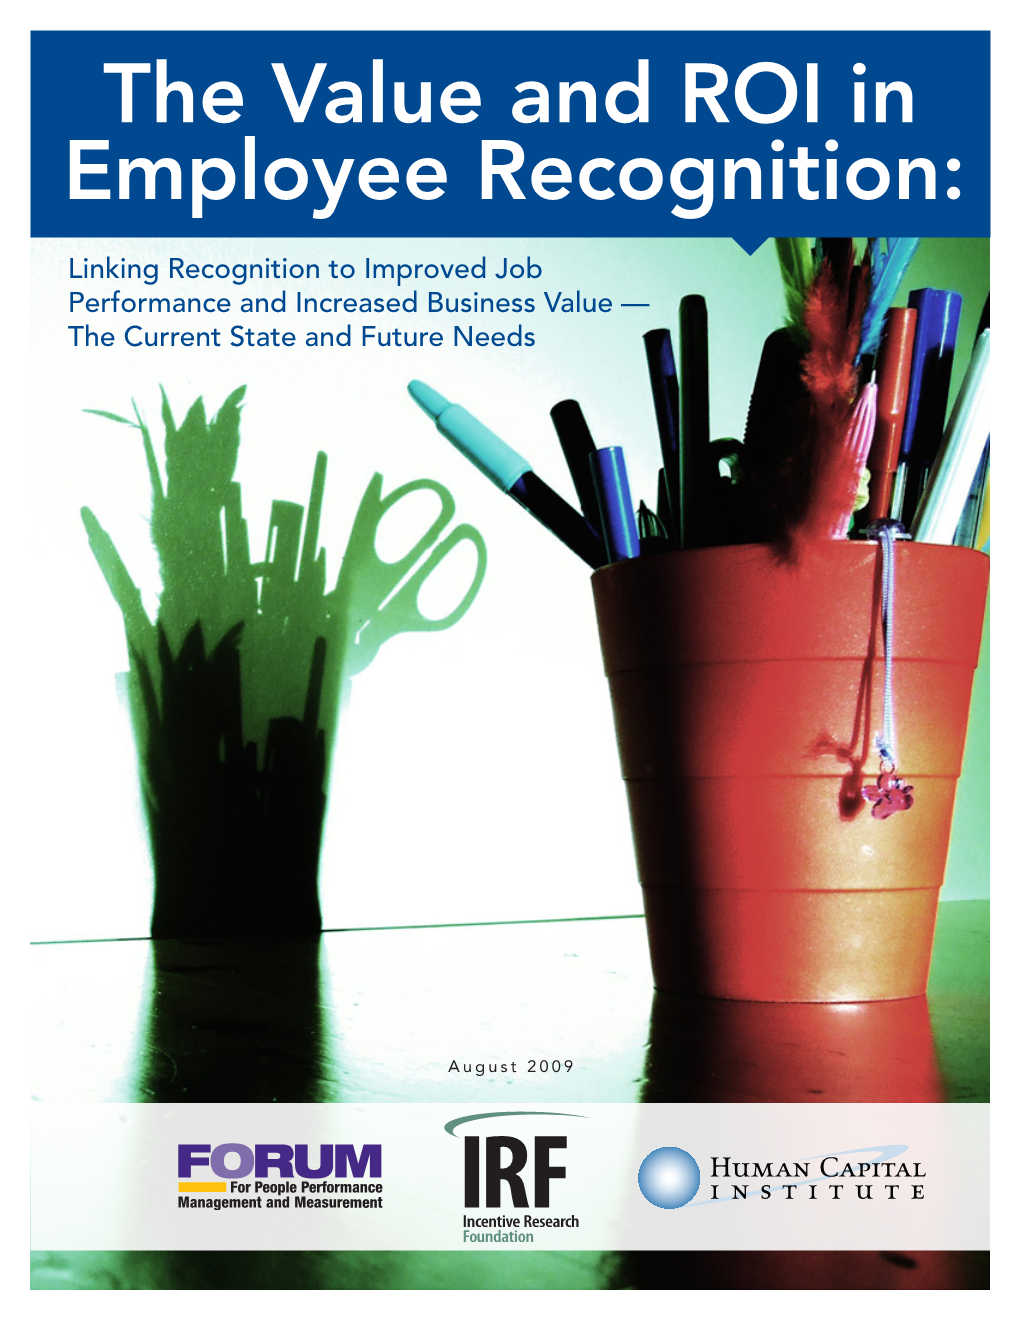 The Value and ROI in Employee Recognition